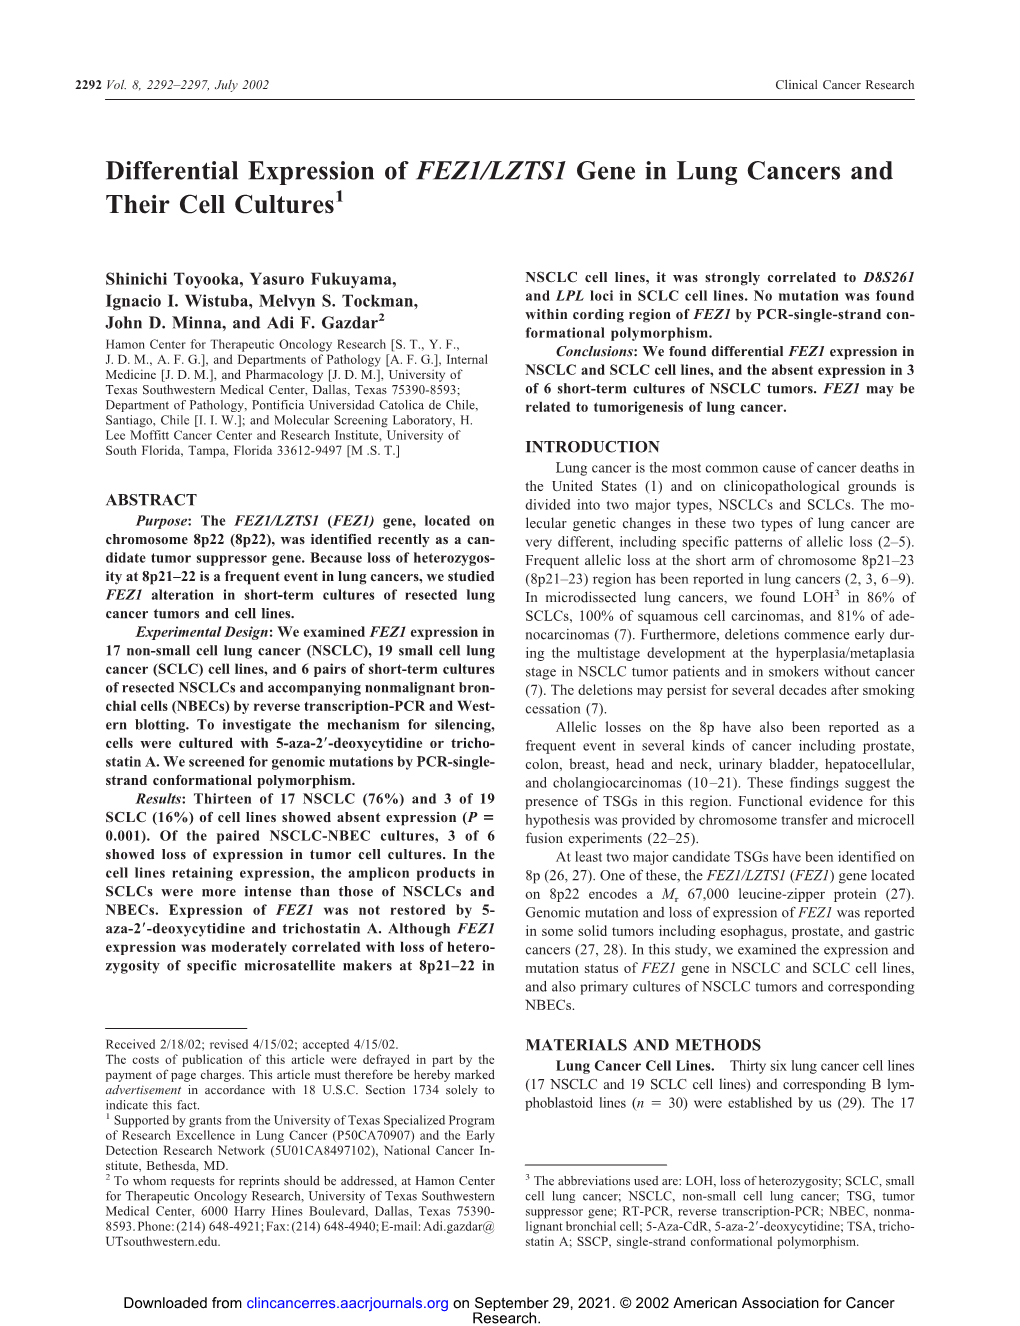 Differential Expression of FEZ1/LZTS1 Gene in Lung Cancers and Their Cell Cultures1